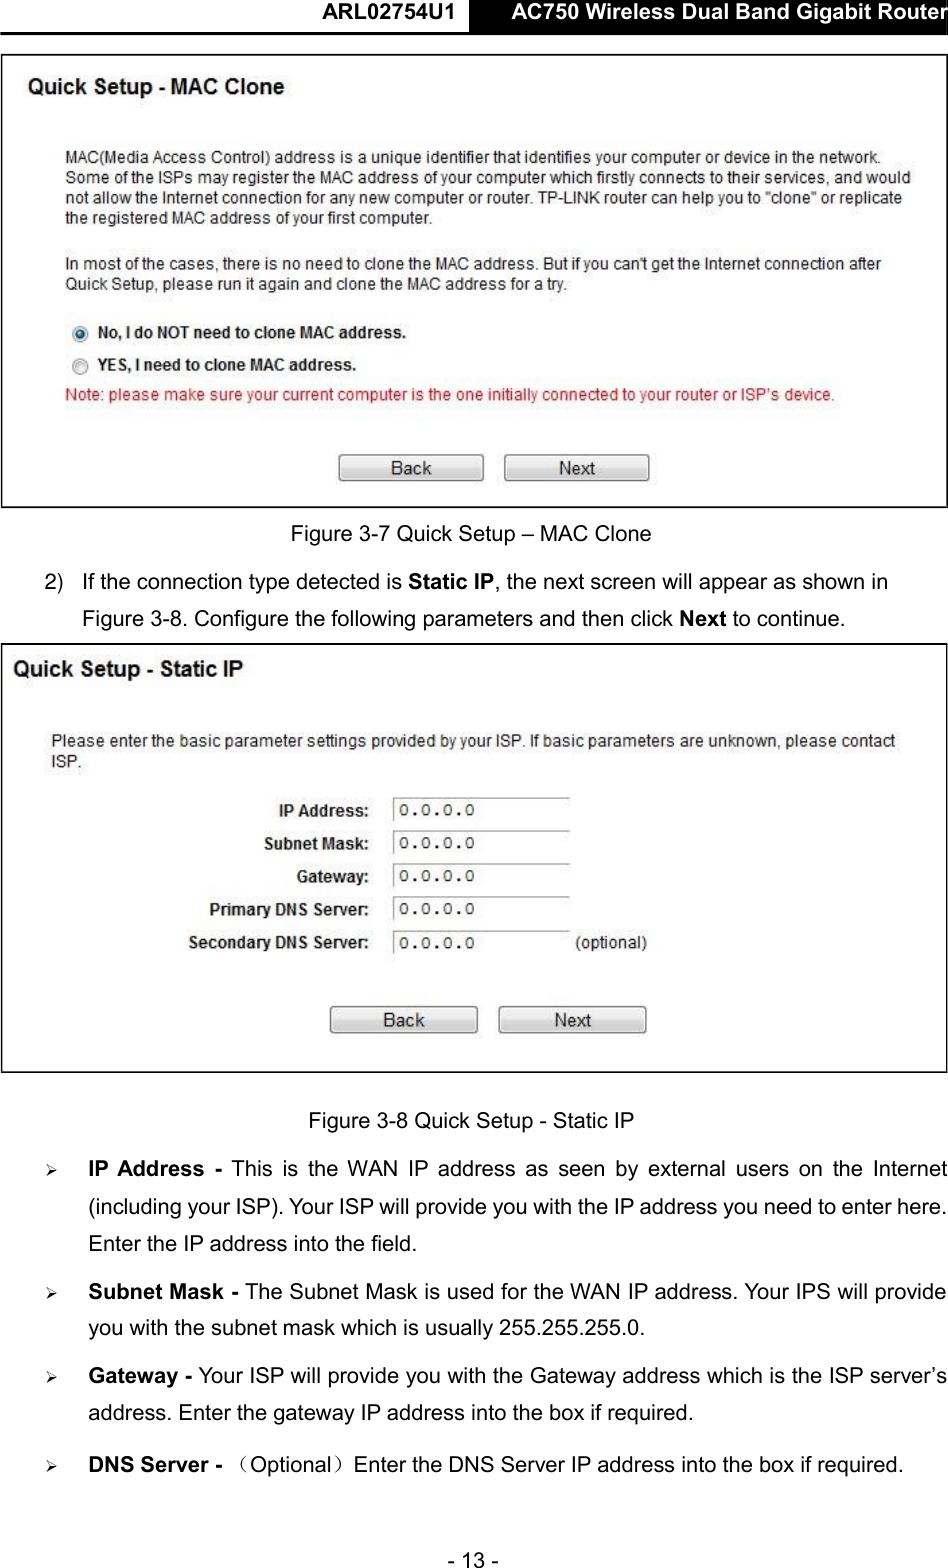  ARL02754U1  AC750 Wireless Dual Band Gigabit Router    - 13 -   Figure 3-7 Quick Setup – MAC Clone  2) If the connection type detected is Static IP, the next screen will appear as shown in Figure 3-8. Configure the following parameters and then click Next to continue.   Figure 3-8 Quick Setup - Static IP   IP Address  -  This  is  the  WAN  IP  address as  seen  by  external  users on  the  Internet (including your ISP). Your ISP will provide you with the IP address you need to enter here. Enter the IP address into the field.   Subnet Mask - The Subnet Mask is used for the WAN IP address. Your IPS will provide you with the subnet mask which is usually 255.255.255.0.   Gateway - Your ISP will provide you with the Gateway address which is the ISP server’s address. Enter the gateway IP address into the box if required.   DNS Server - （Optional）Enter the DNS Server IP address into the box if required.       